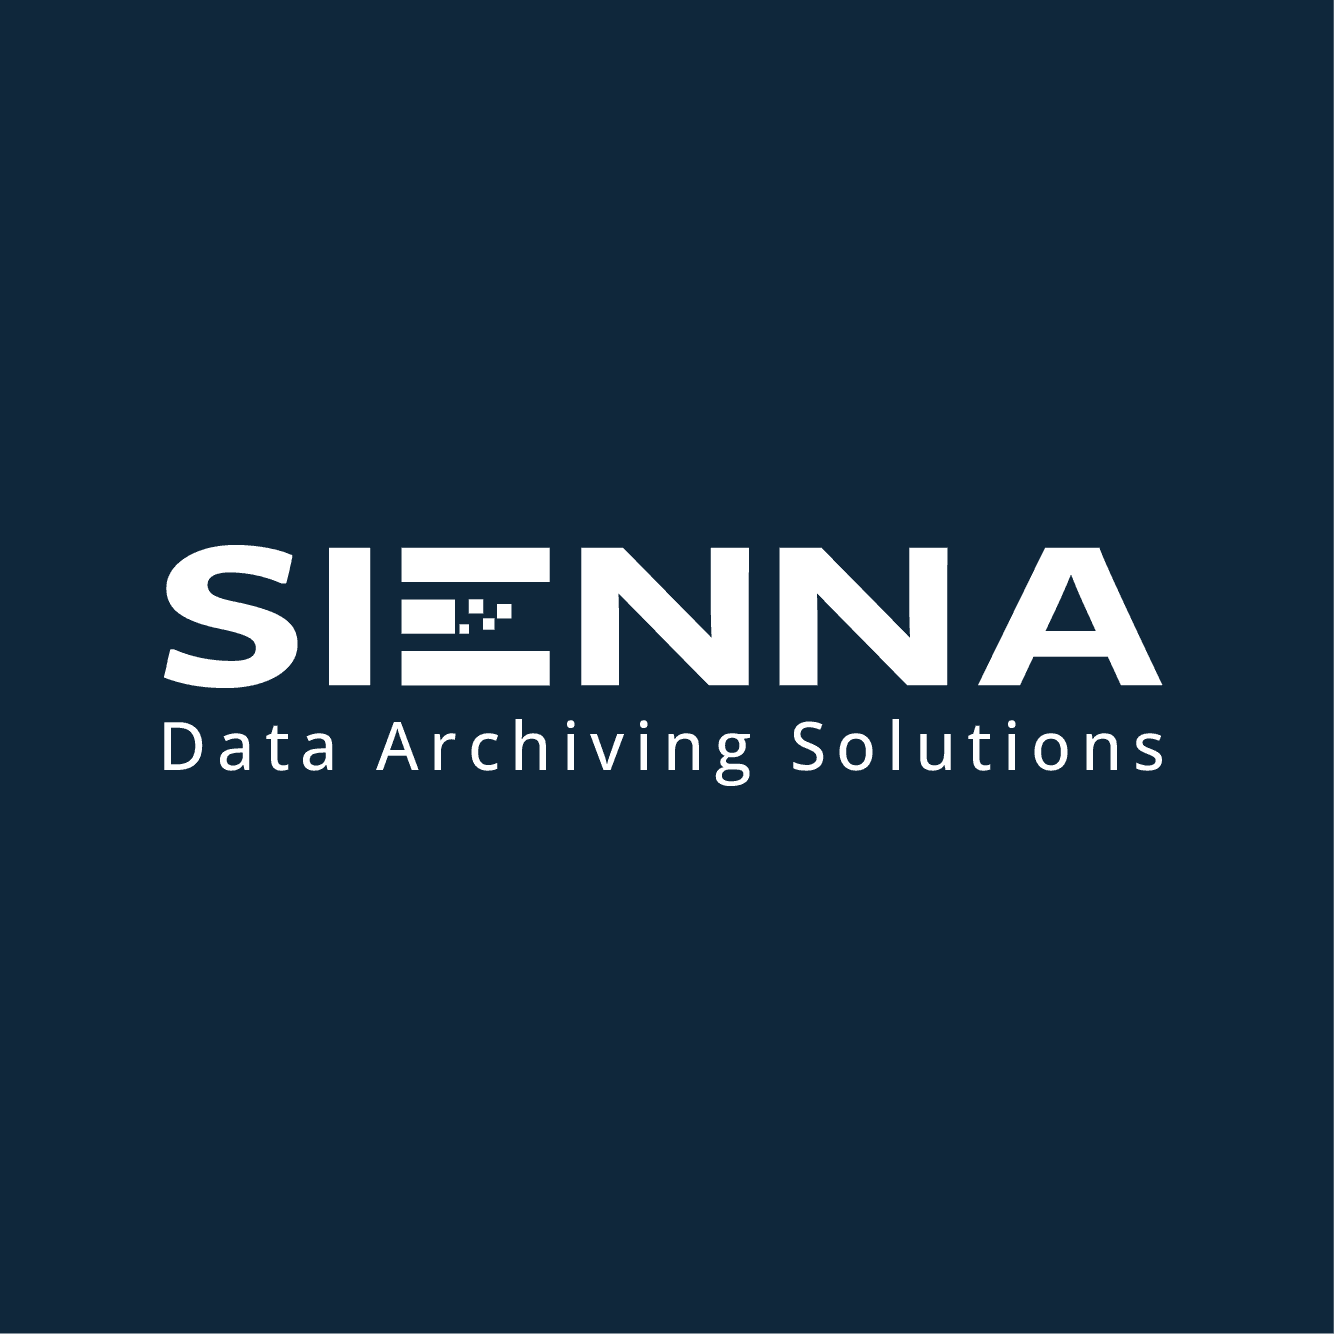 SIENNA Data Archiving Solutions